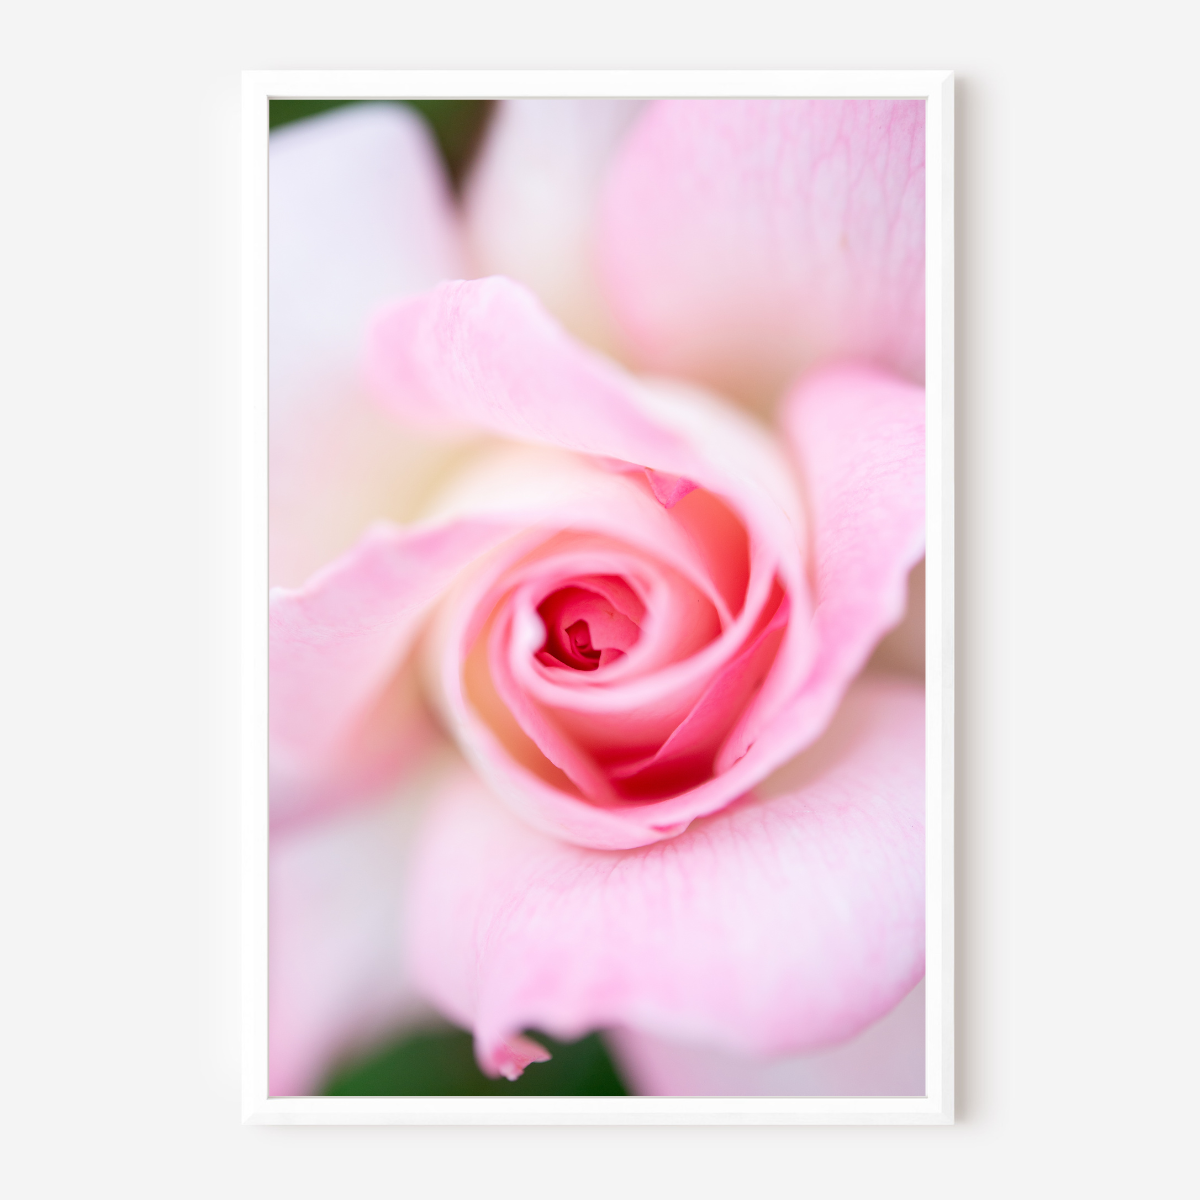 Pretty & Pink - Fine Art Photography - Art for your home or Office